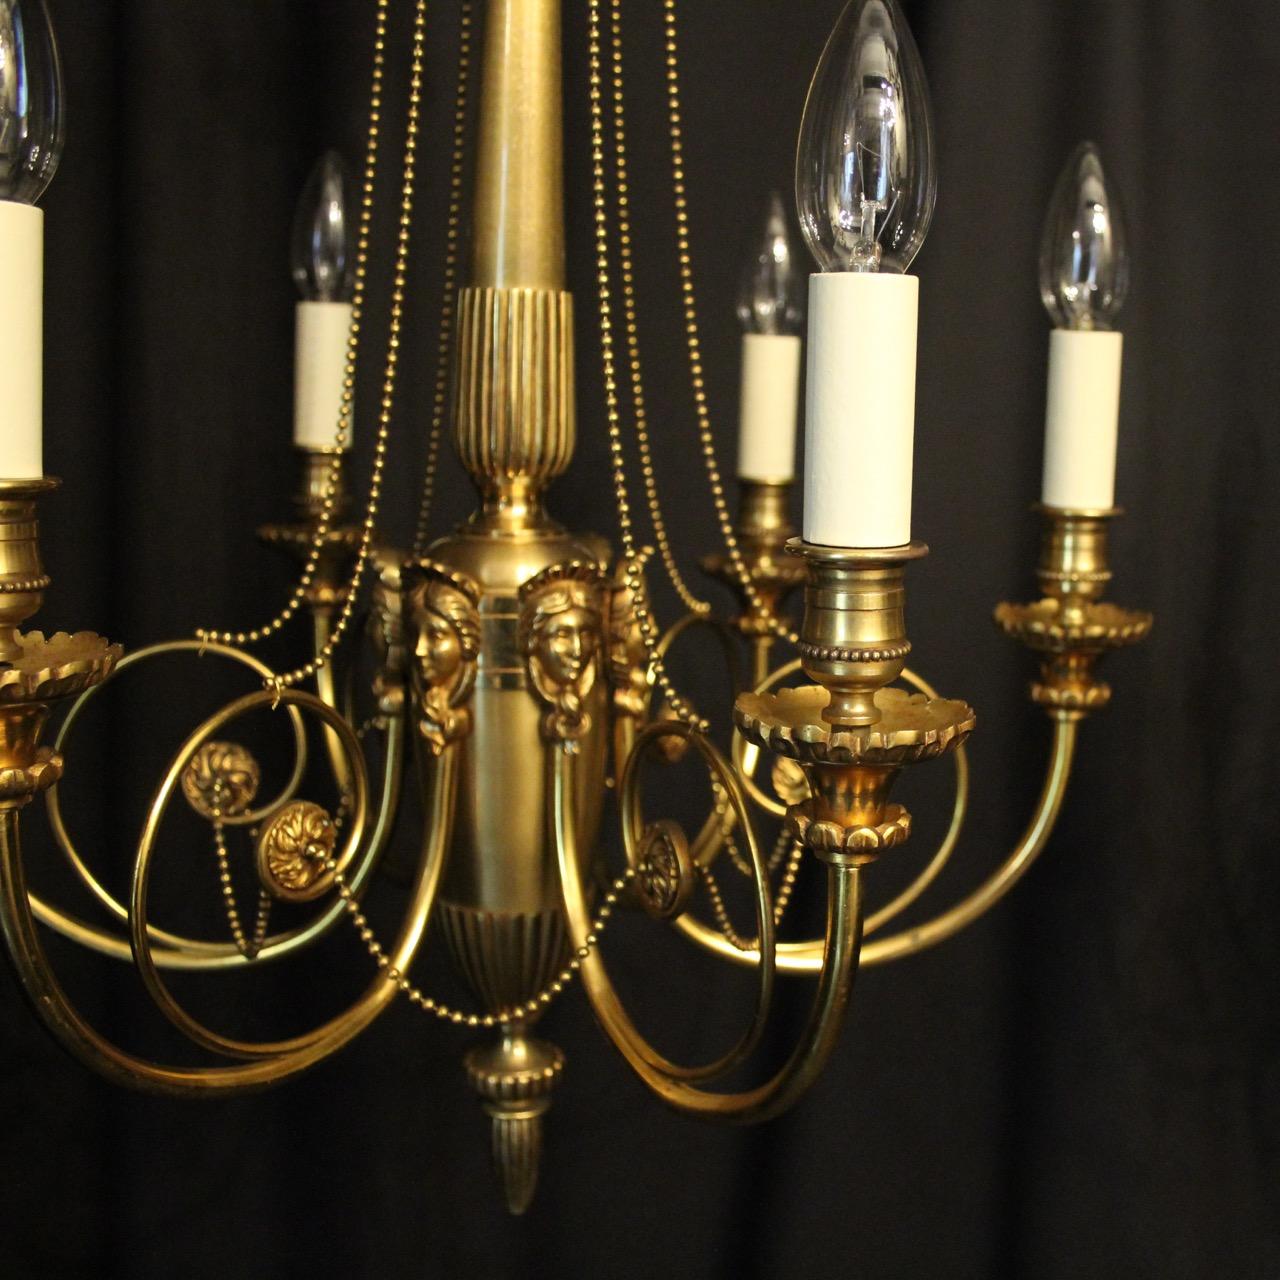 A French pair of gilded brass Lucien Gau 6-light antique chandeliers, the scrolling arms with ornate trumpet bobeche drip pans and candle sconces, issuing from a tapering central column with six decorative female mask heads and reeded base, with